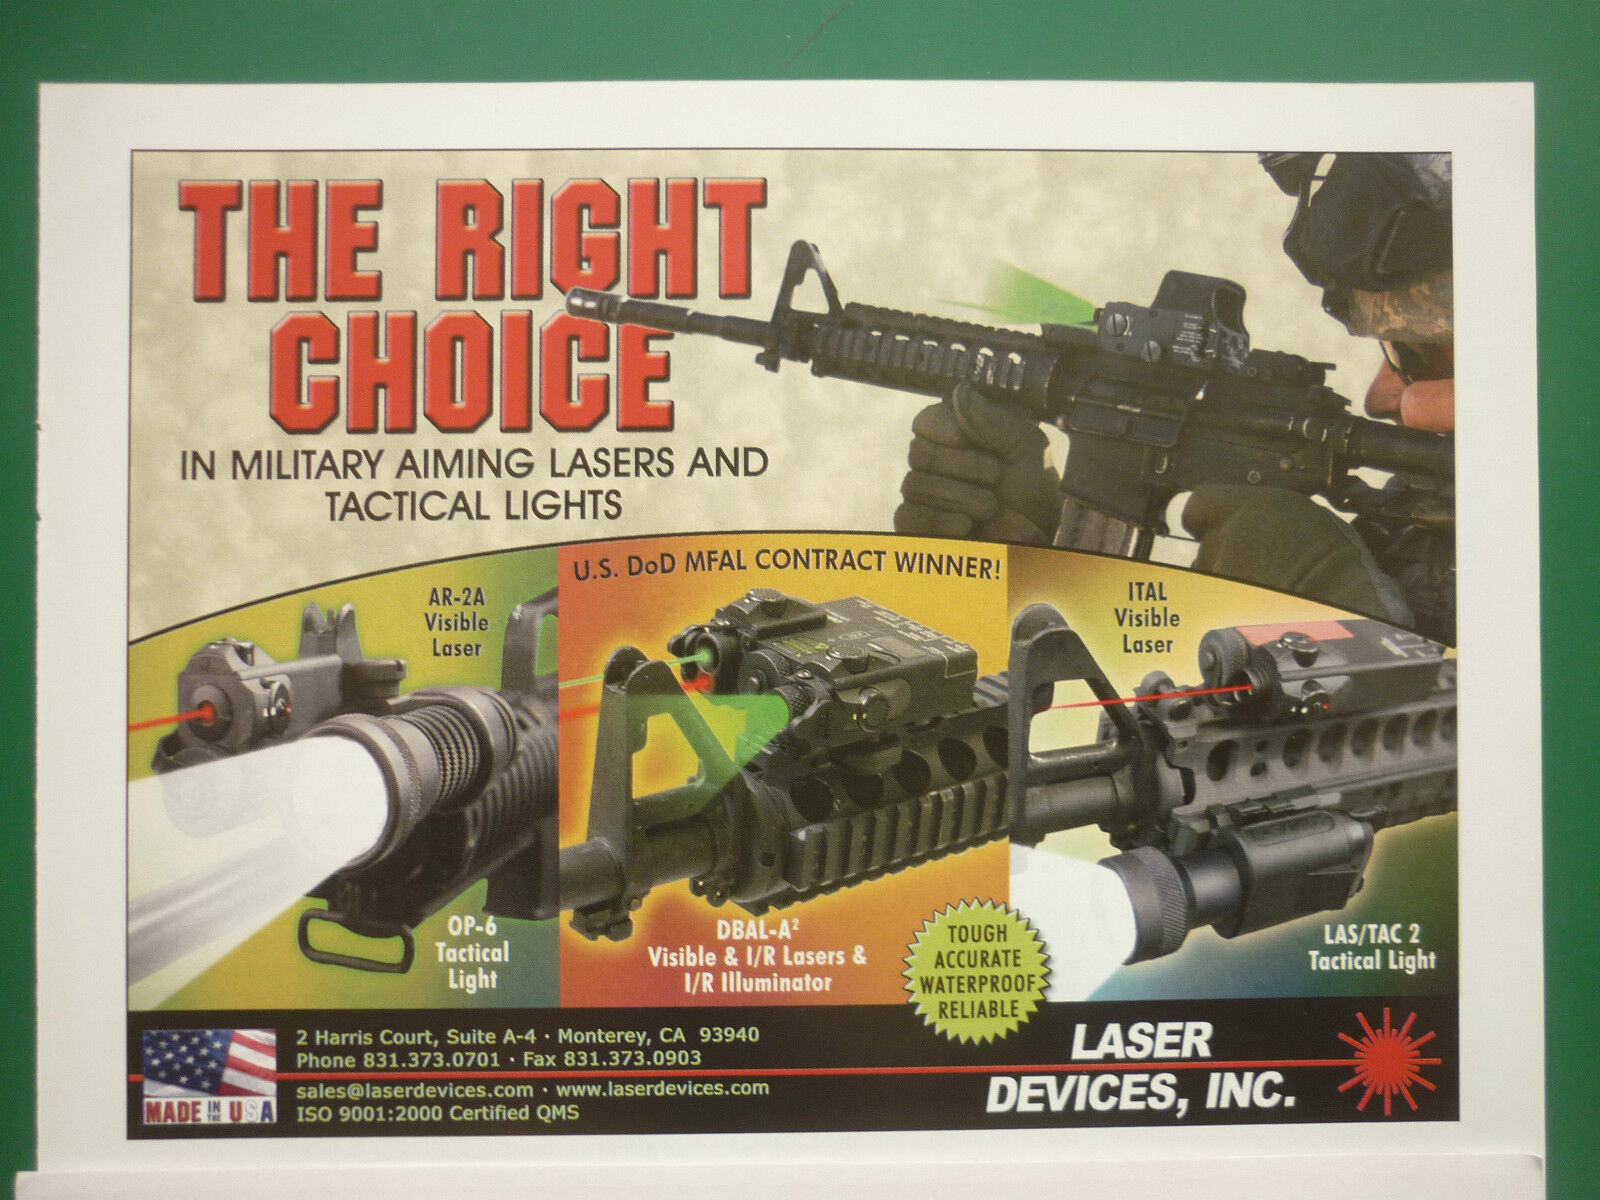 8/2006 PUB LASER DEVICES MILITARY AIMING LASER TACTICAL LIGHTS US ARMY AD